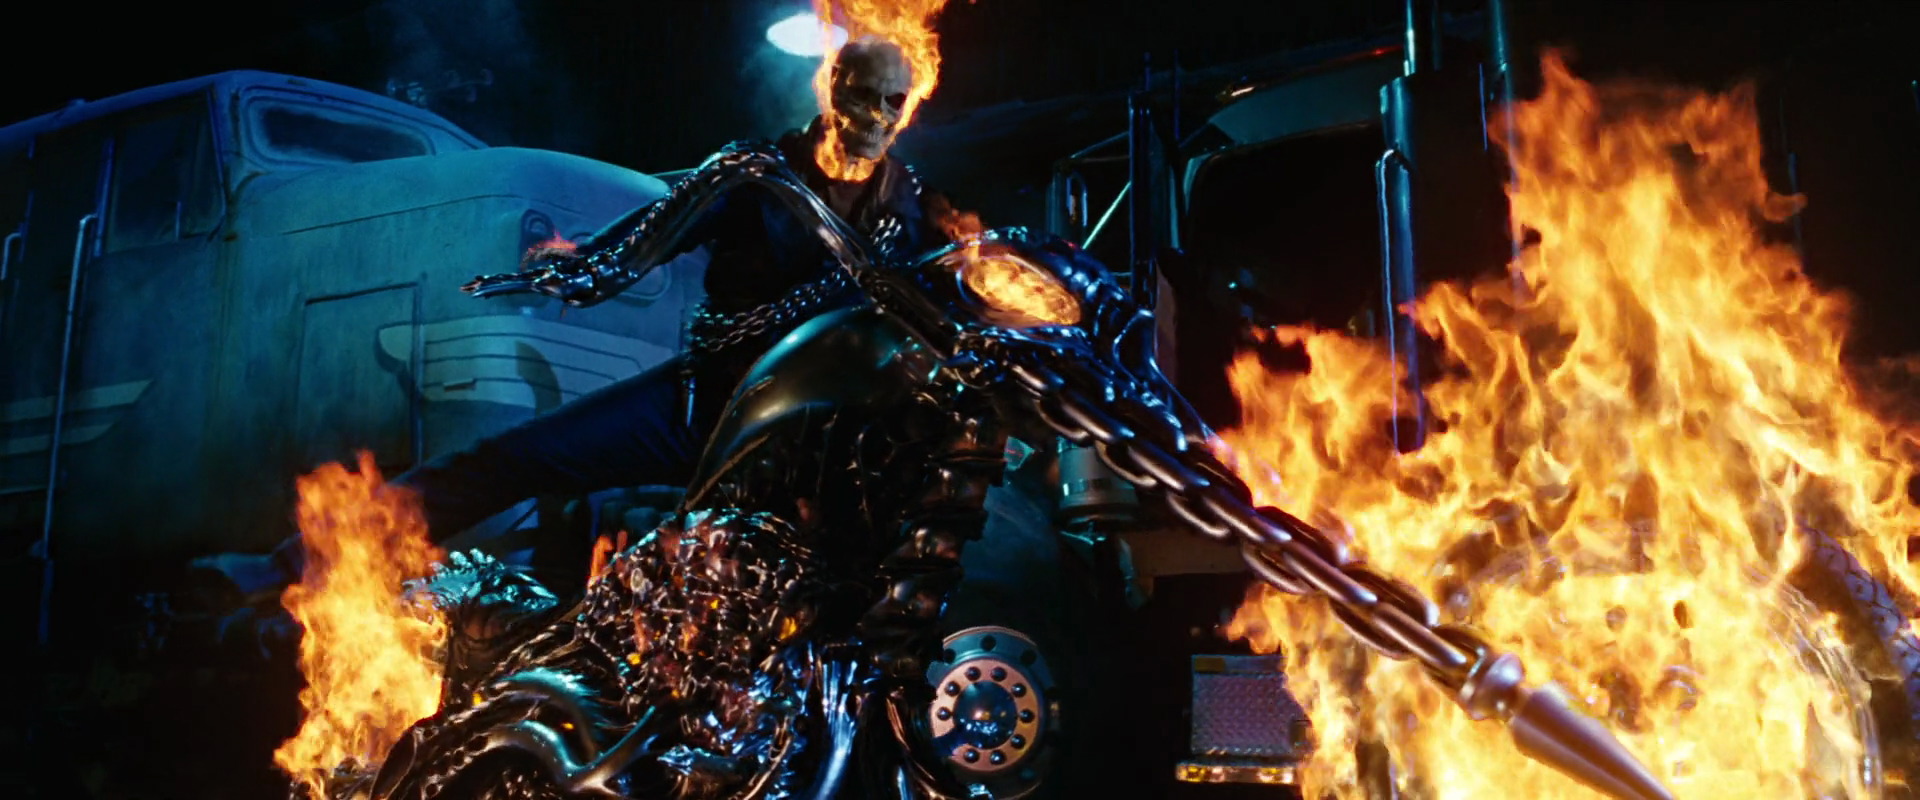 ghost rider movie in hindi free download hd